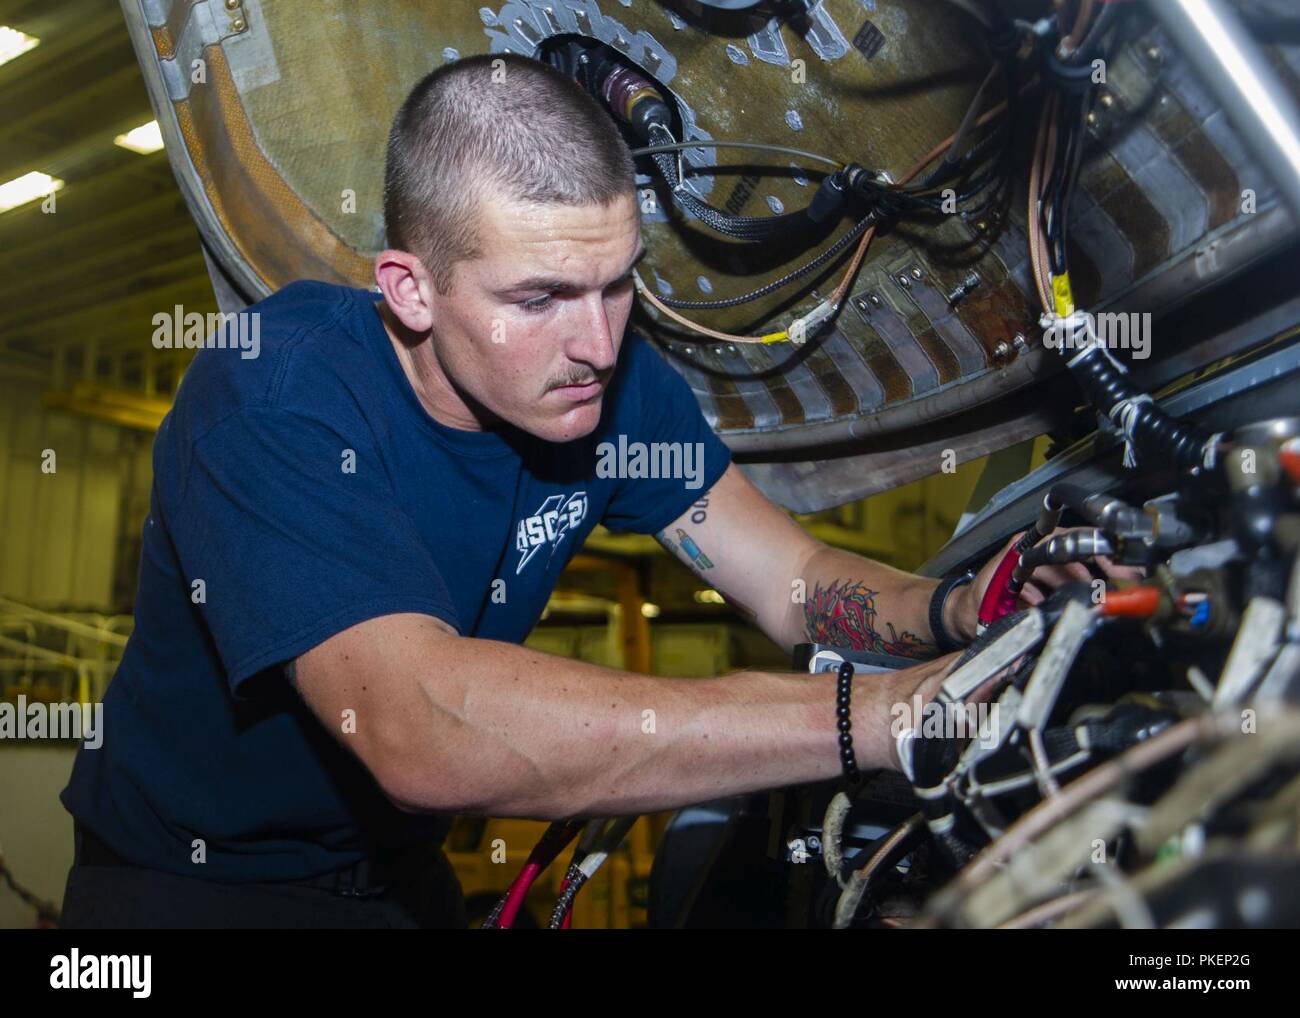 PACIFIC OCEAN (July 30, 2018) – Aviation Electronics Technician 3rd Class Ryan Baker, assigned to the “Blackjacks” of Helicopter Sea Combat Squadron (HSC) 21, conducts maintenance on an MH-60S Seahawk helicopter in the hangar bay of Wasp-class amphibious assault ship USS Essex (LHD 2) during a regularly scheduled deployment of the Essex Amphibious Ready Group (ARG) and 13th Expeditionary Unit (MEU). The Essex ARG/13th MEU is a capable and lethal Navy-Marine Corps team deployed to the 7th fleet area of operations to support regional stability, reassure partners and allies and maintain a presenc Stock Photo